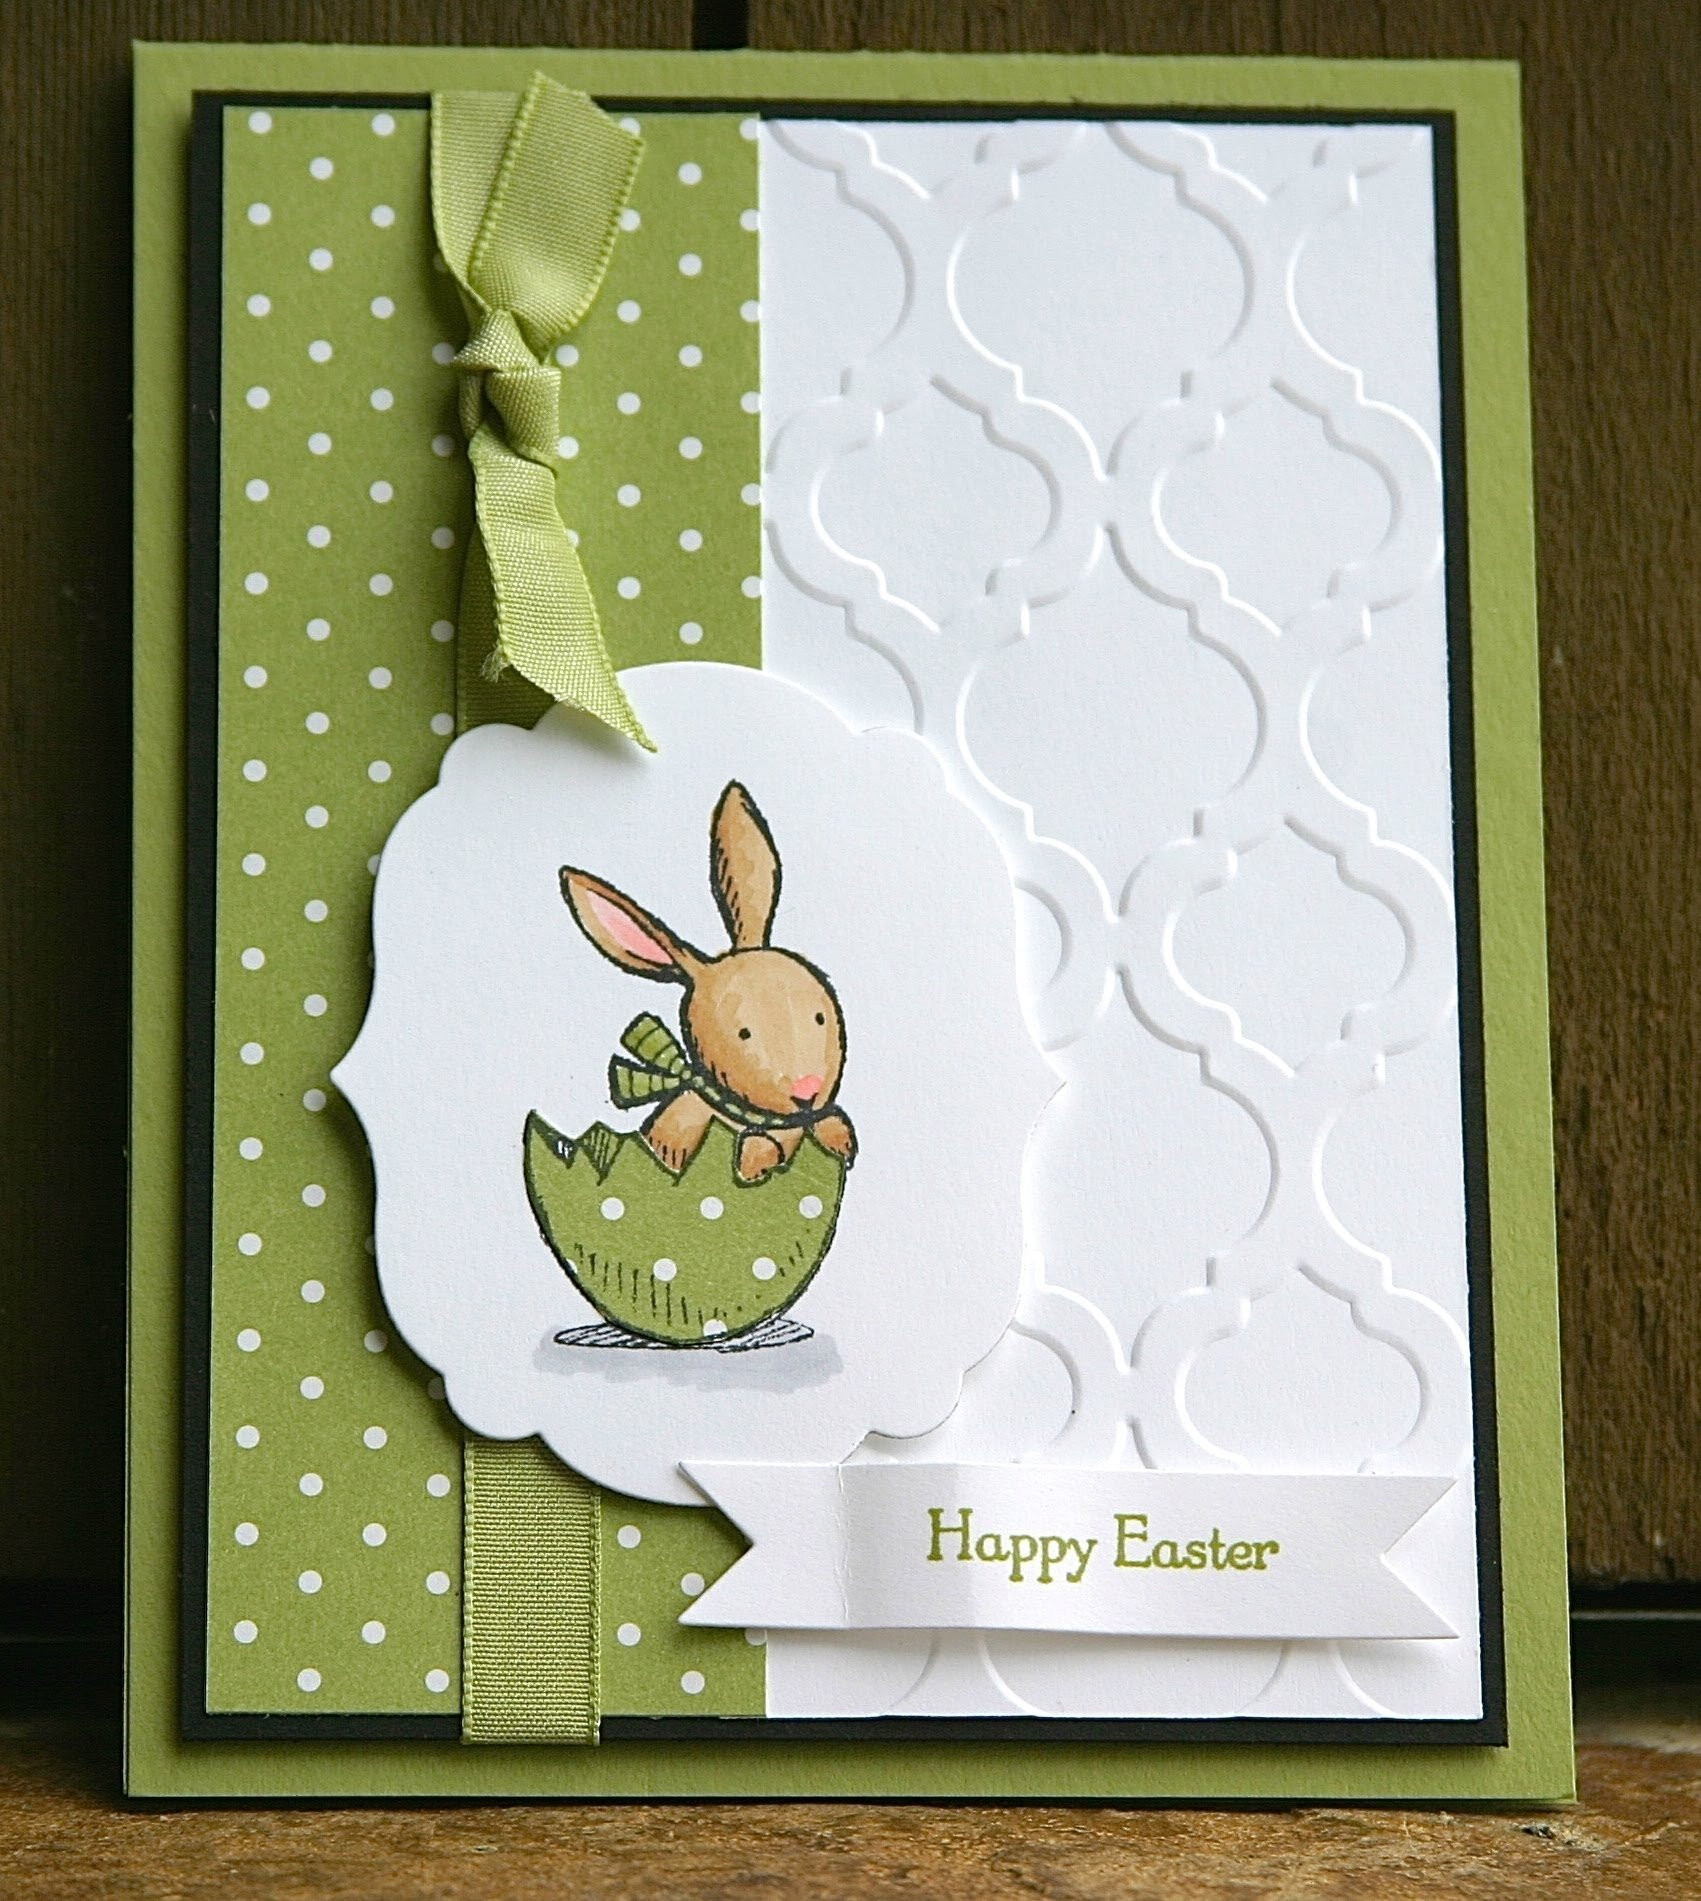 Stampin Up Easter Cards Ideas
 10 Lovable Stampin Up Easter Card Ideas 2020